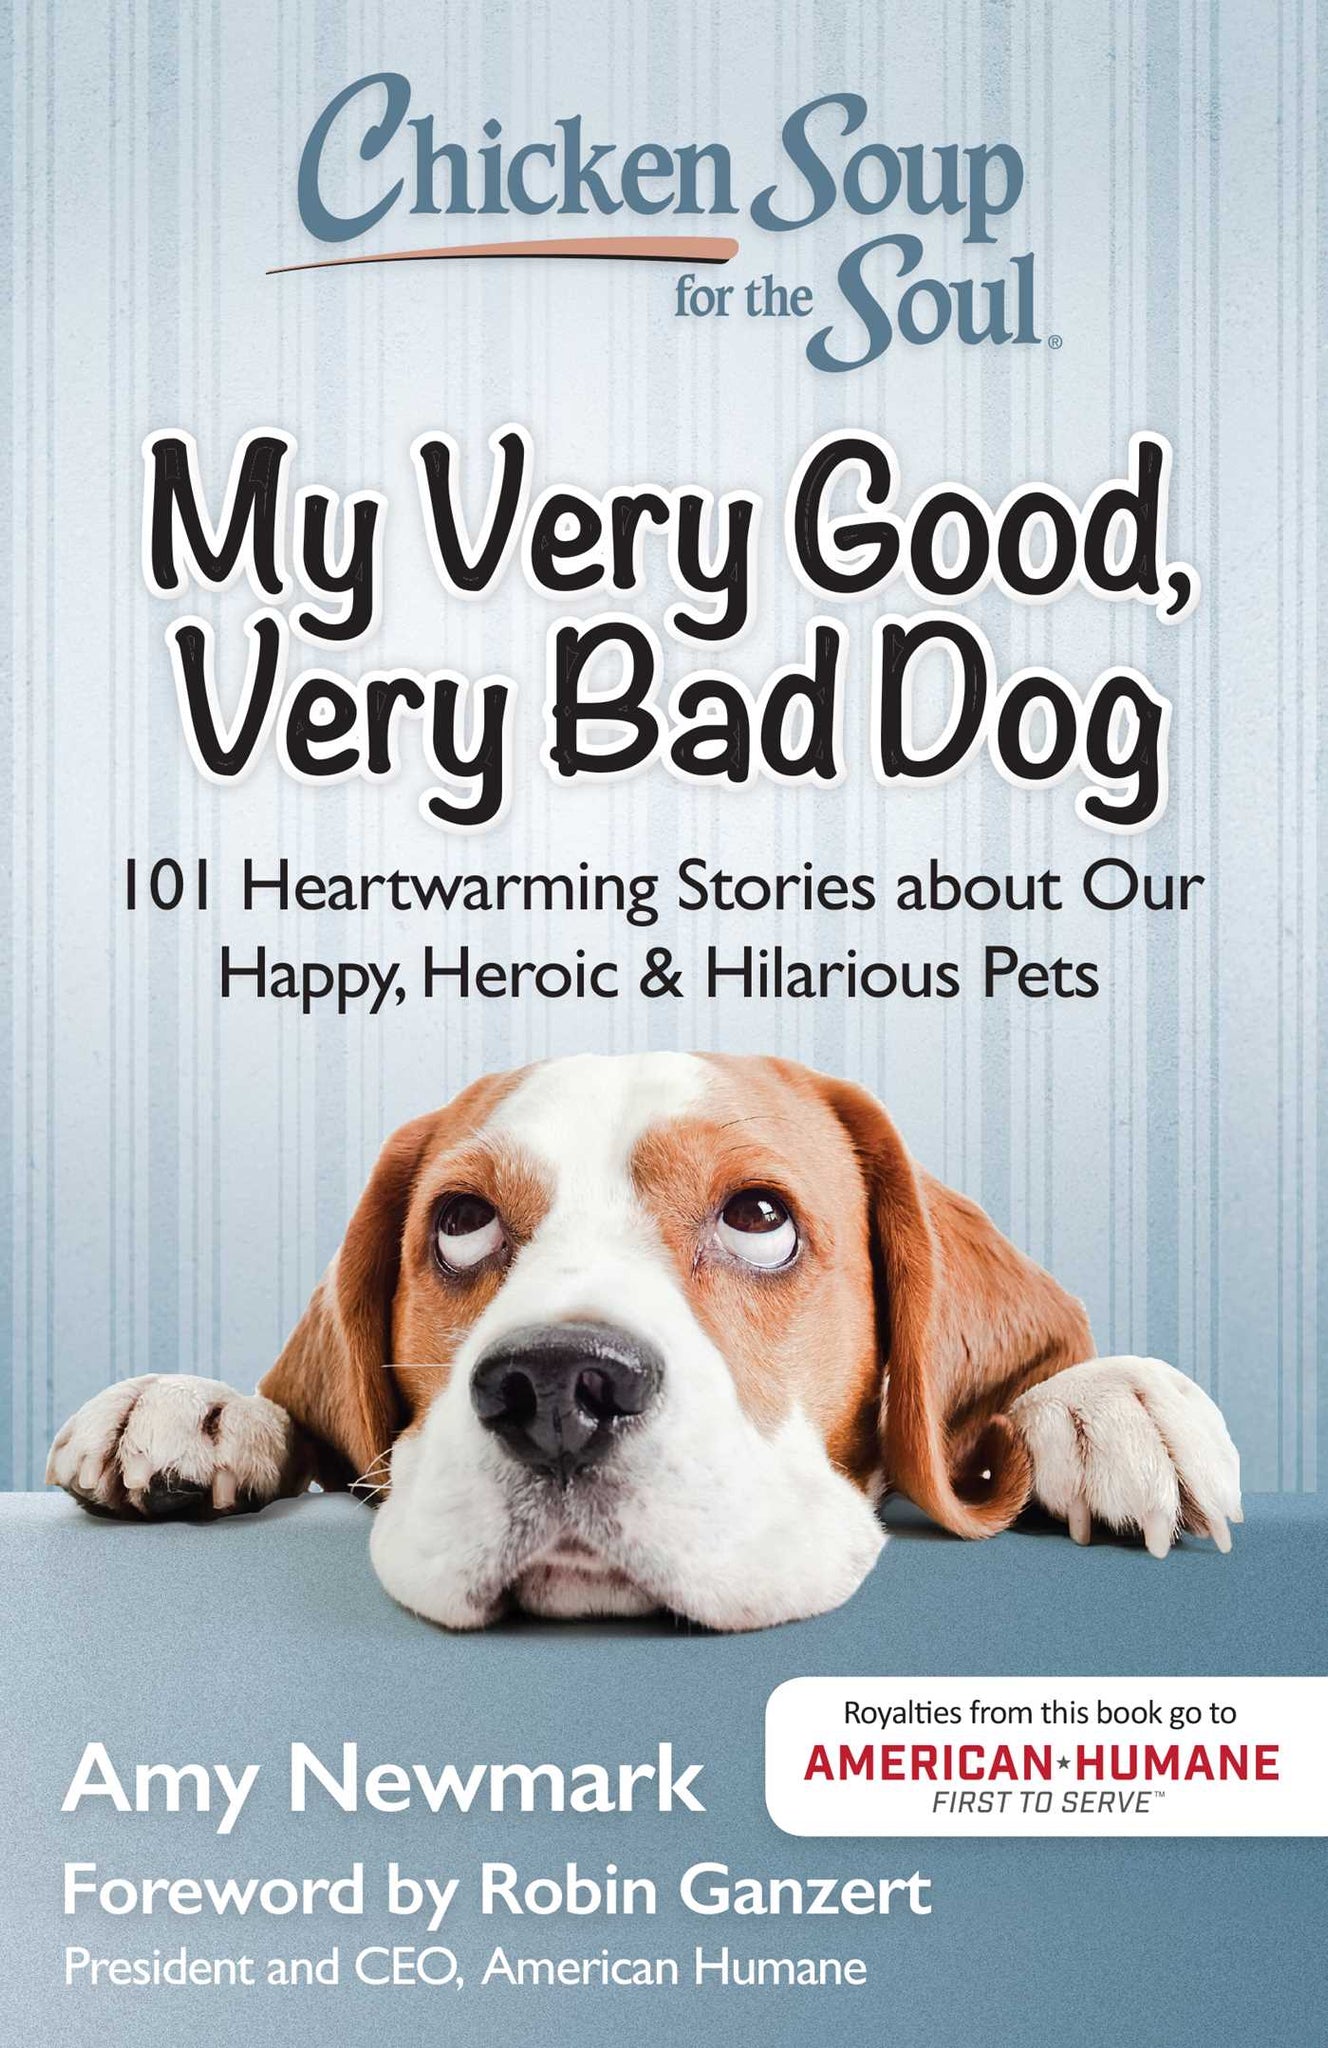 Chicken Soup for the Soul: My Very Good, Very Bad Dog : 101 Heartwarming Stories about Our Happy, Heroic & Hilarious Pets